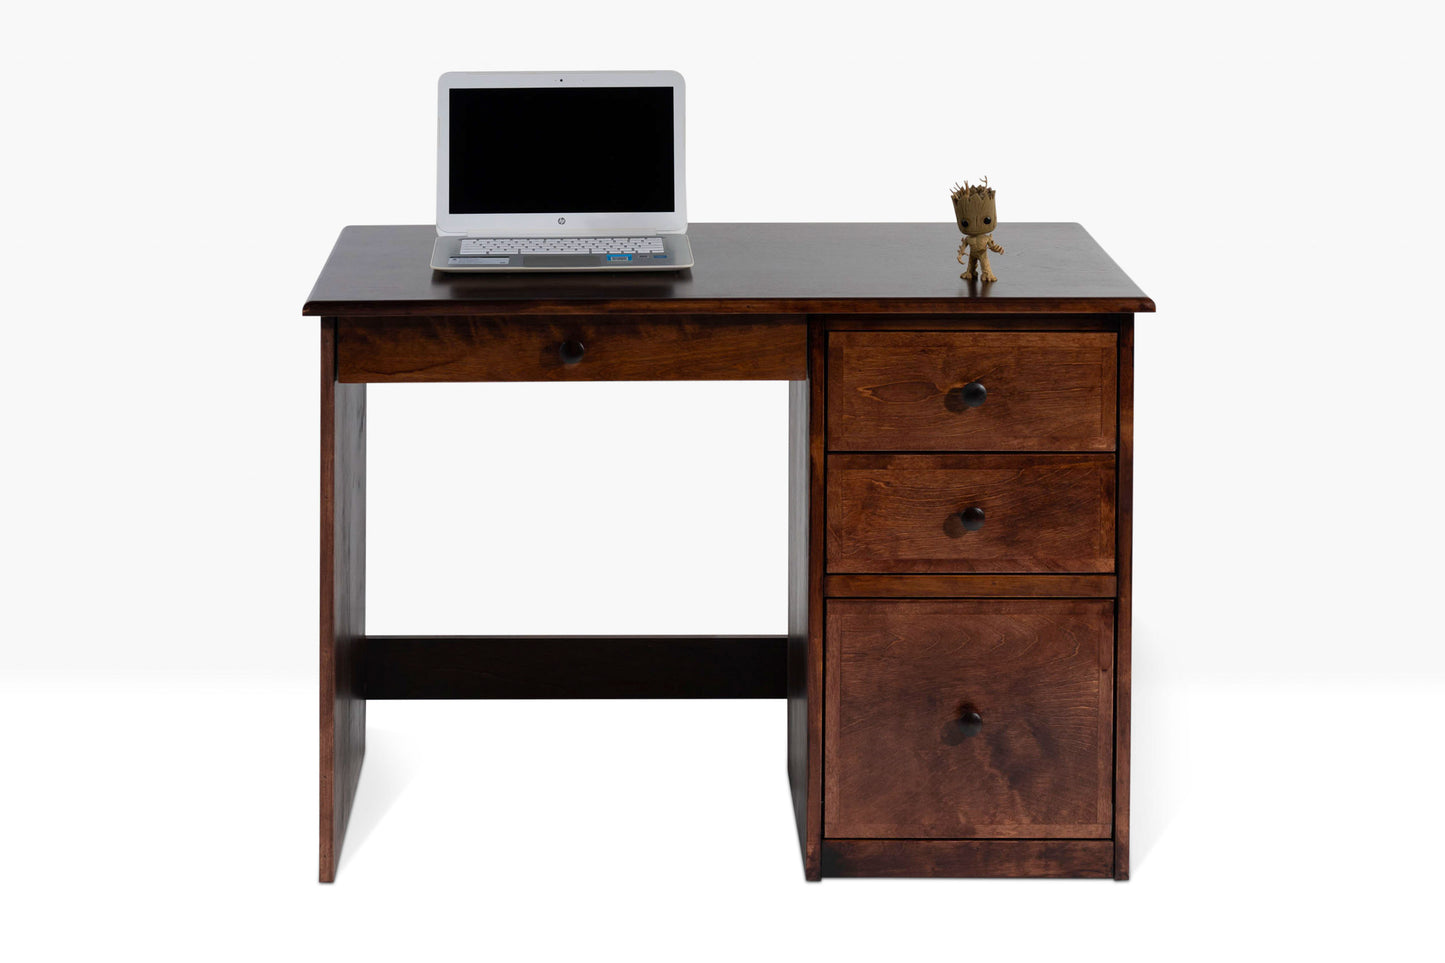 Berkshire Student Desk with Drawers shown in Rosewood finish, featuring four drawers with birch construction. 